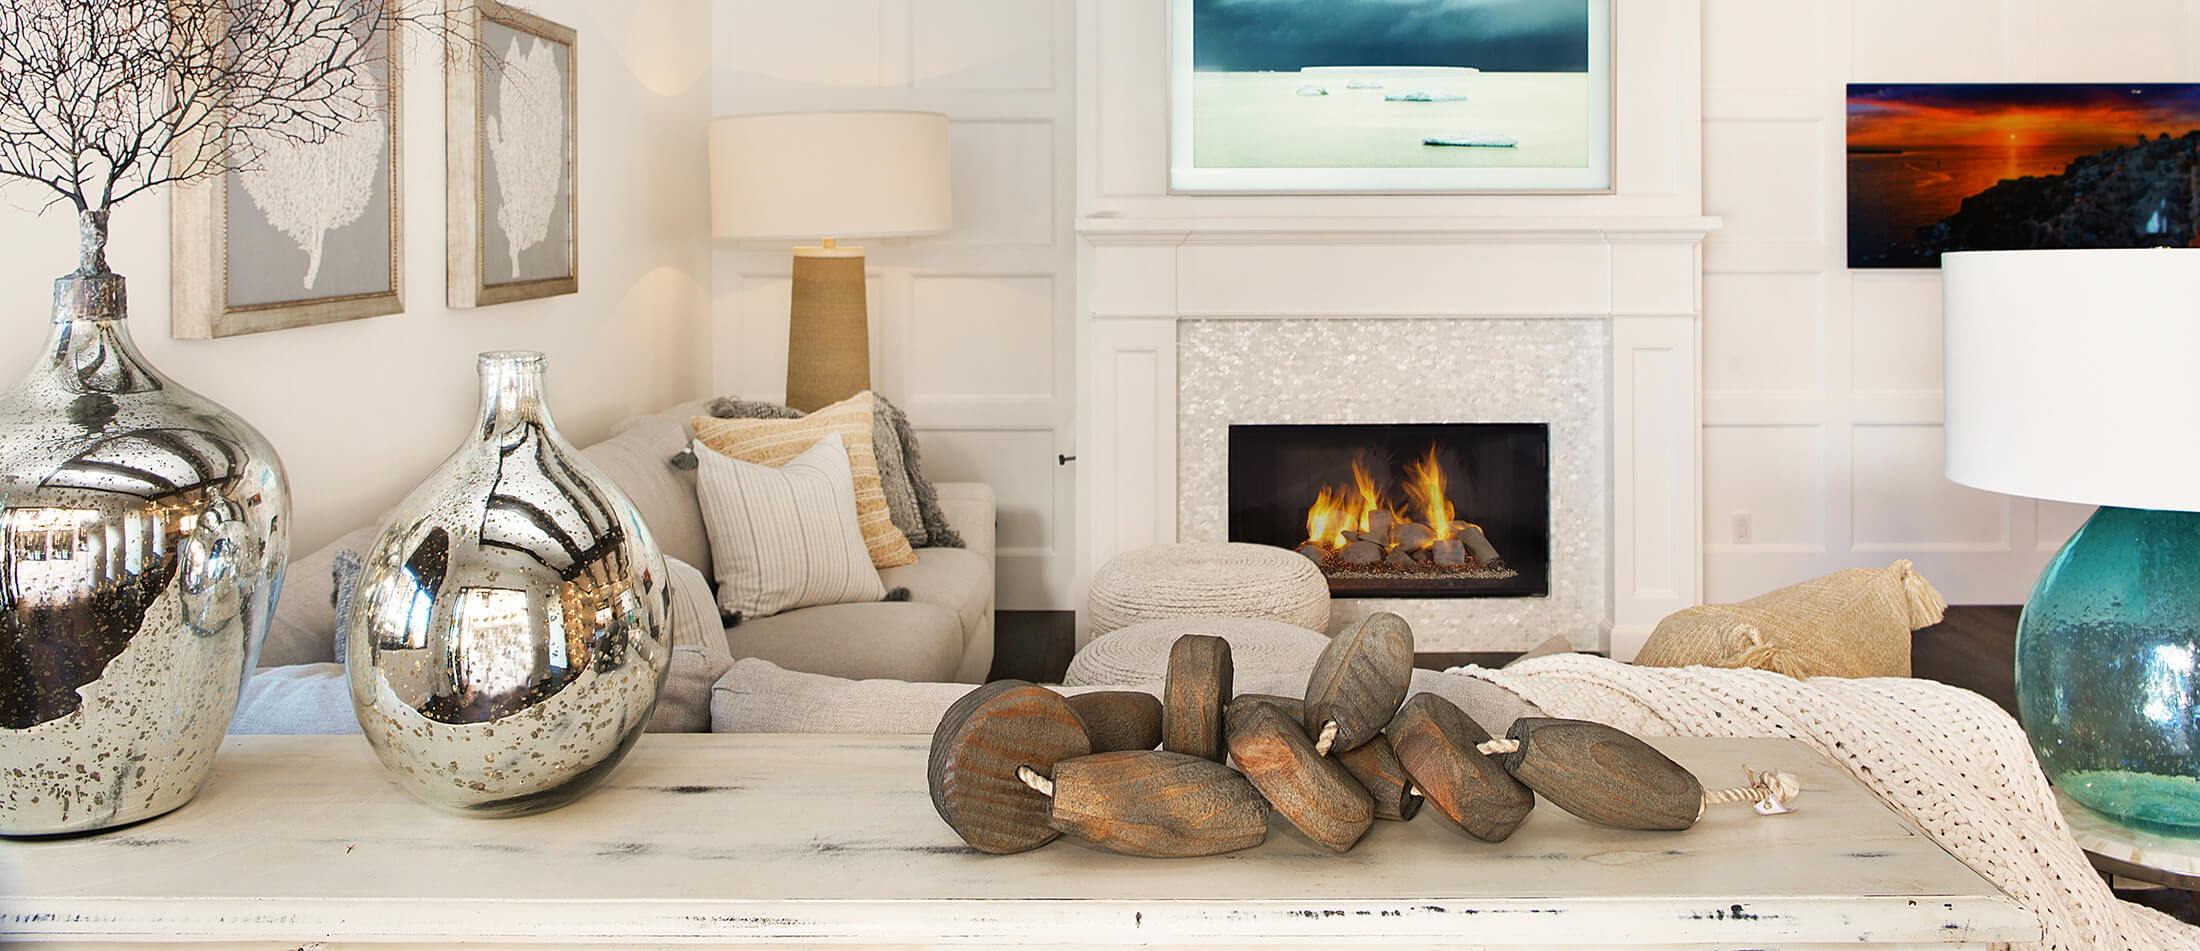 A Coastal style living room interior design with a custom fireplace from Dura Supreme Cabinetry.